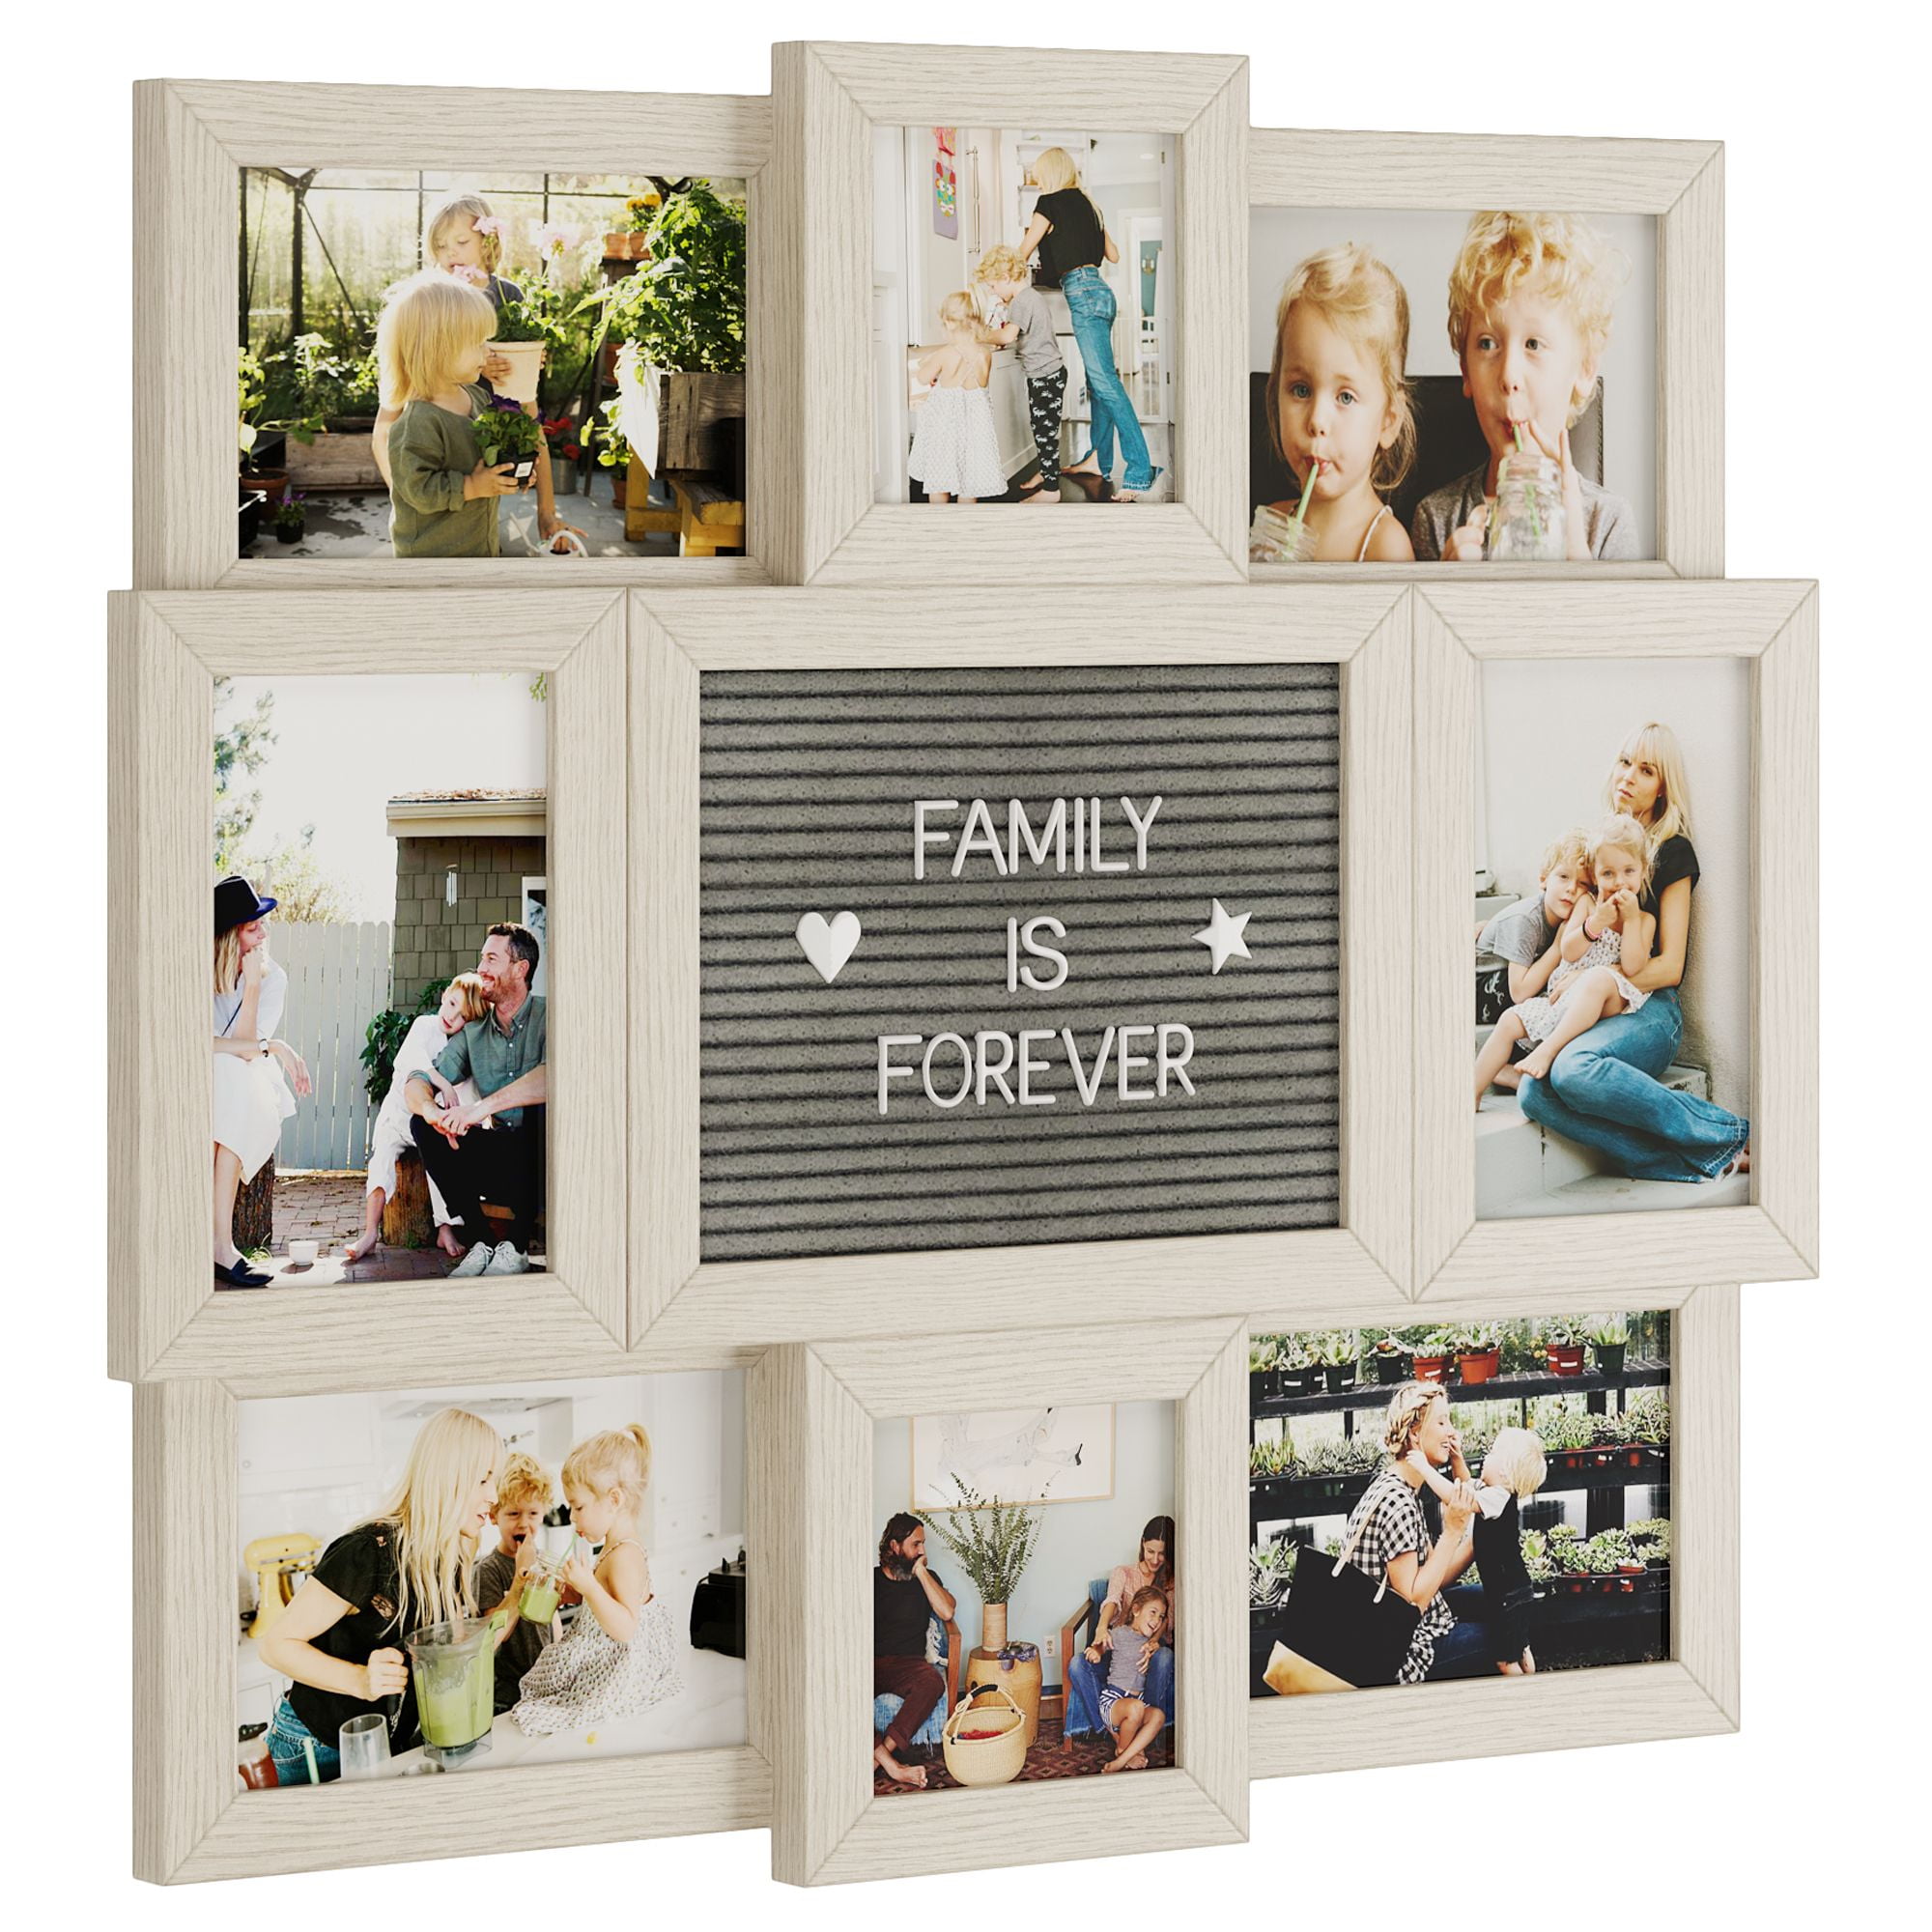 SONGMICS Collage Picture Frames, 4x6 Picture Frames Collage for Wall Decor,  10 Pack Photo Collage Frame for Gallery, Multi Family Picture Frame Set